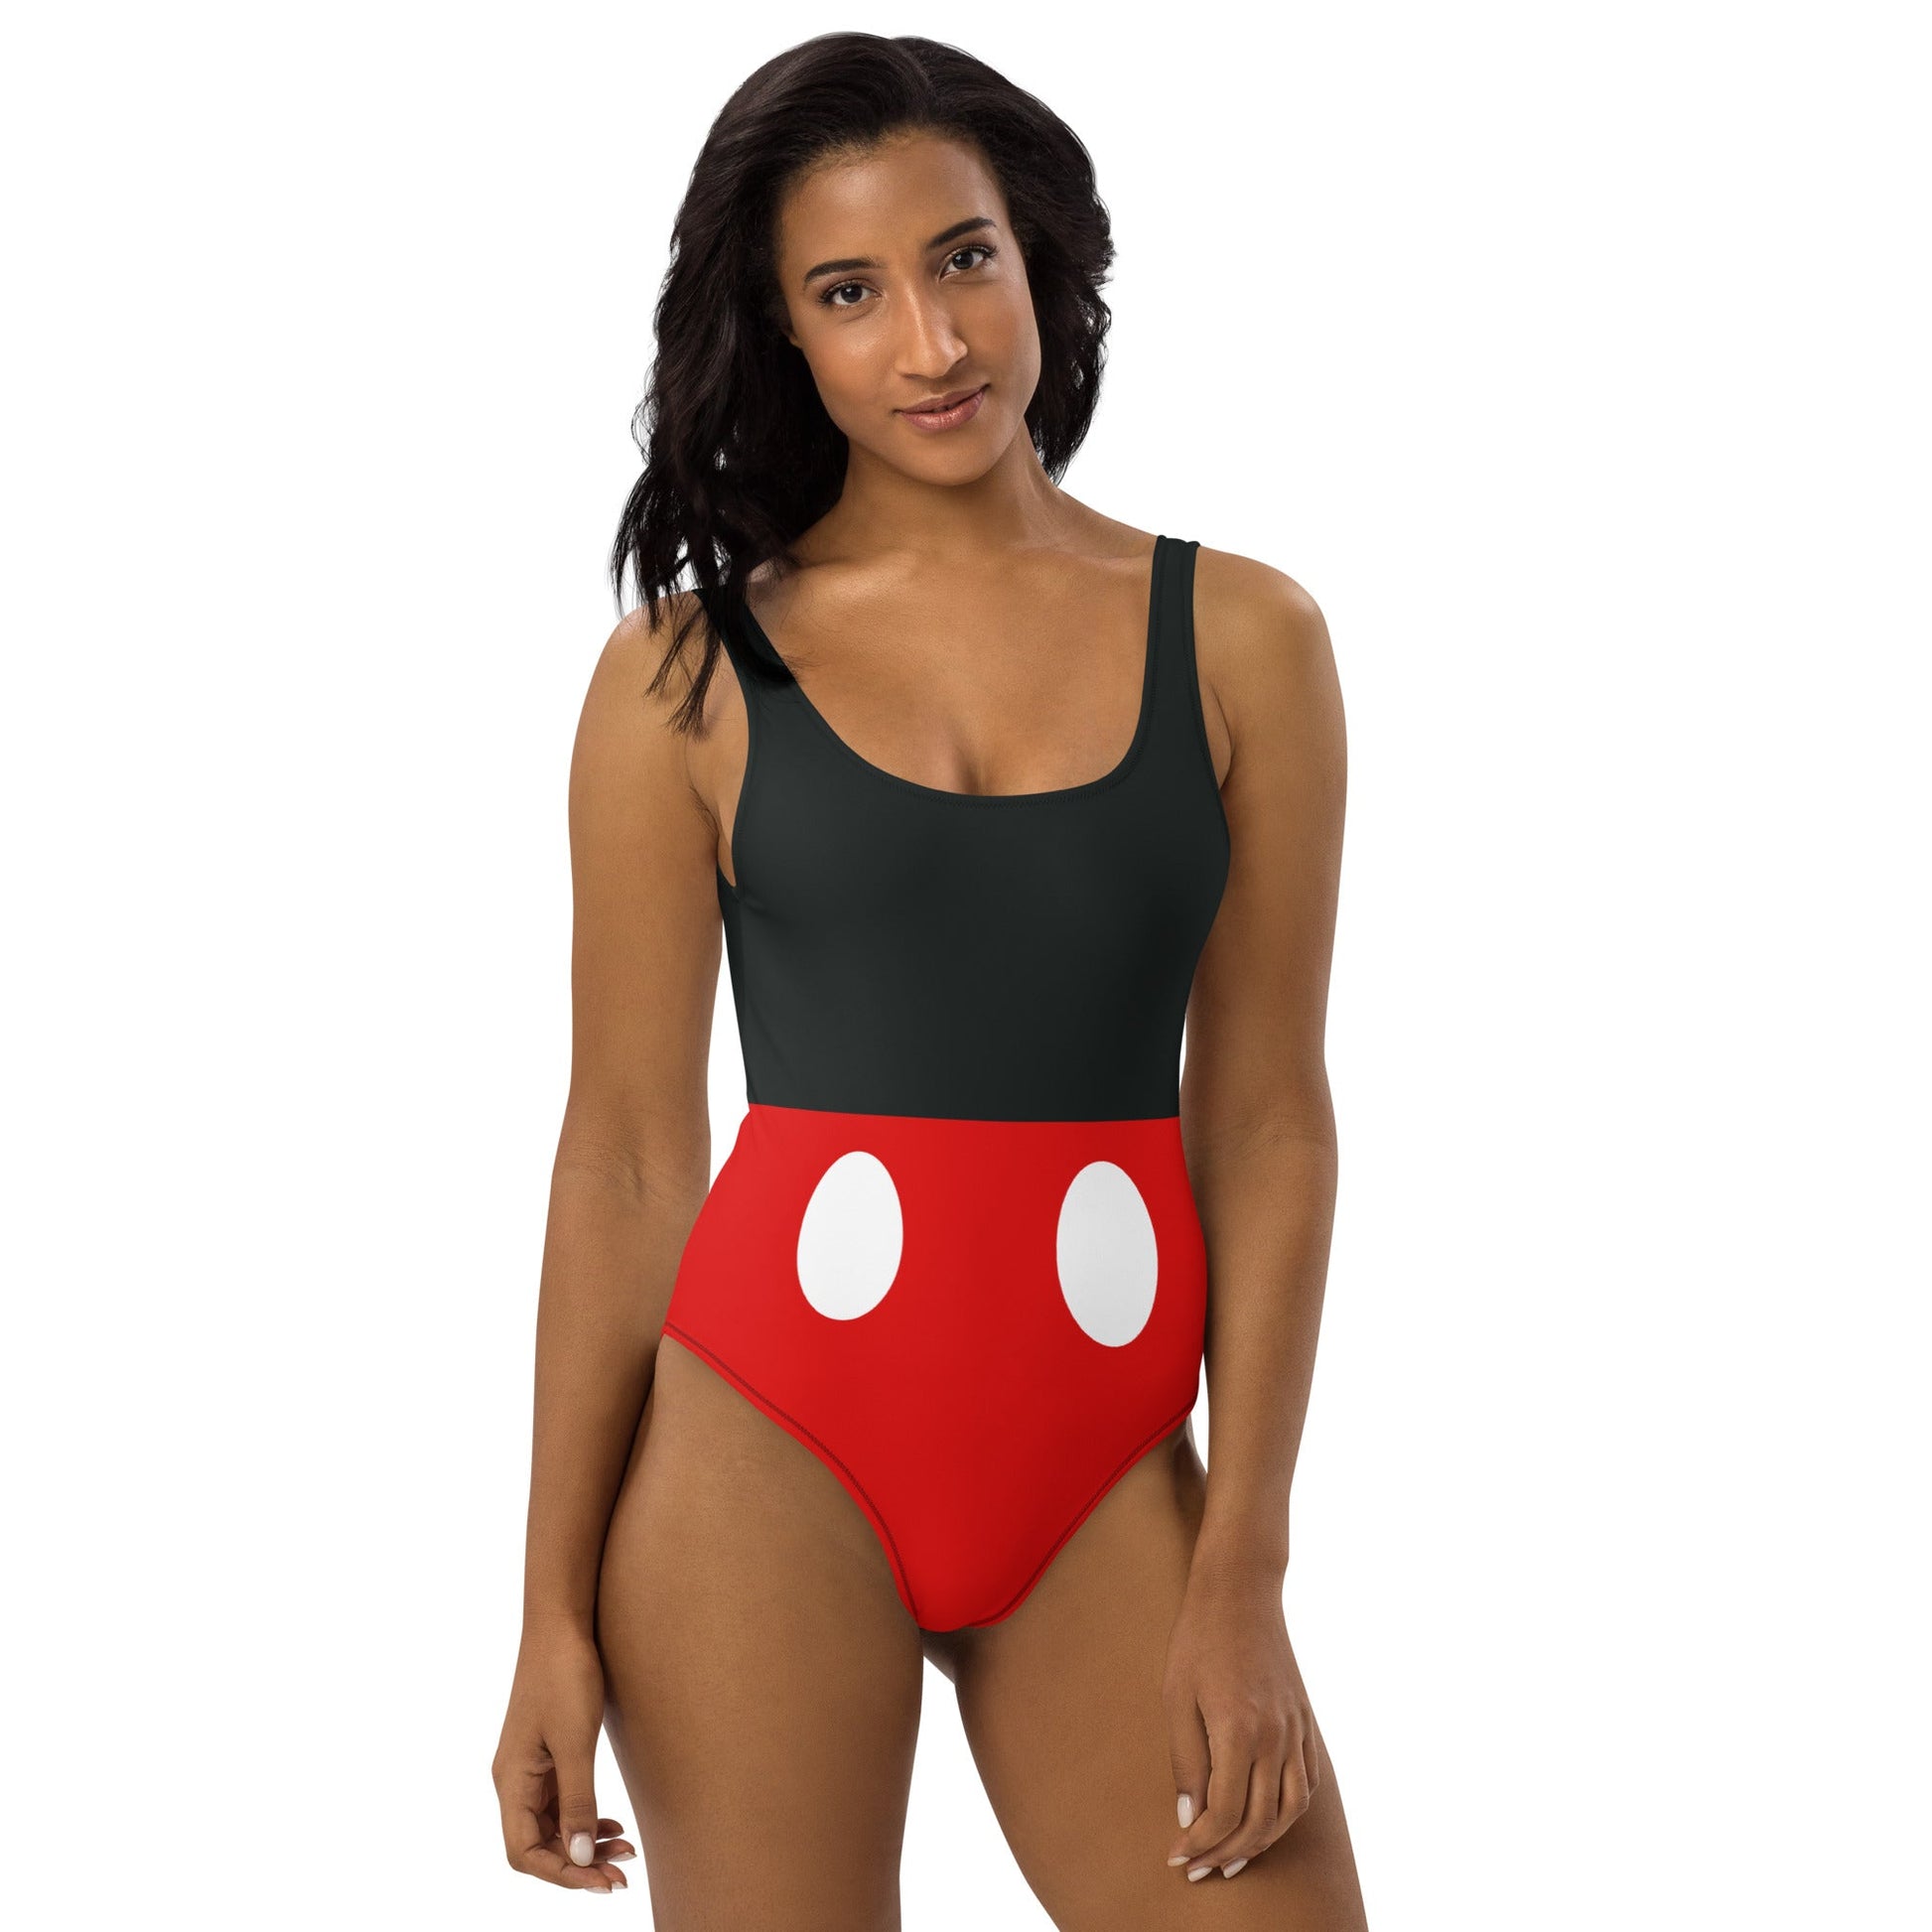 The Mouse One-Piece Swimsuit adult disneyDisney adult swimWrong Lever Clothing